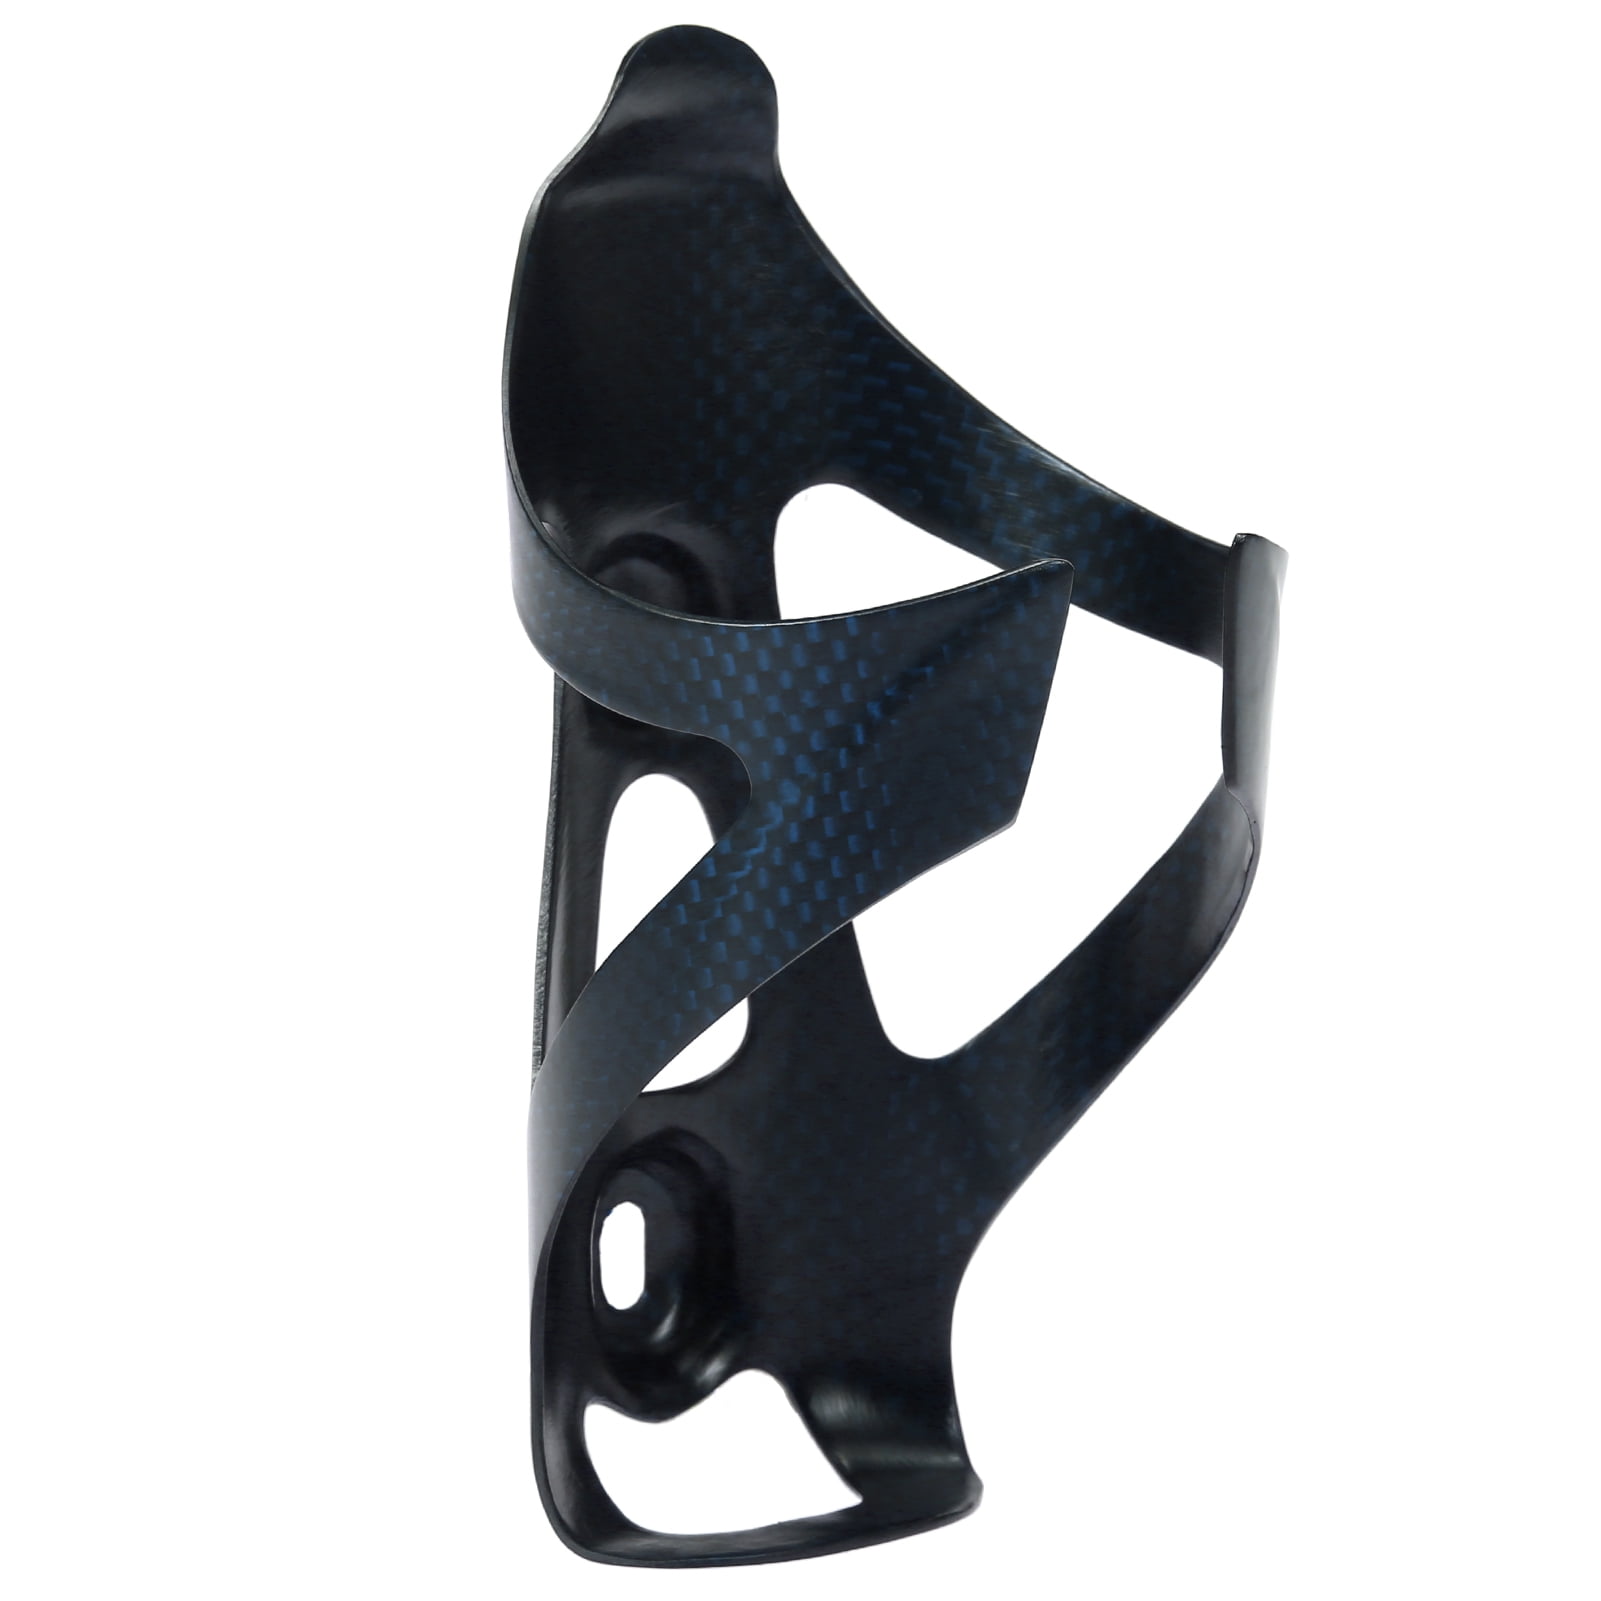 Road/Mountain bike full carbon bicycle drink water bottle cages lightest holders 